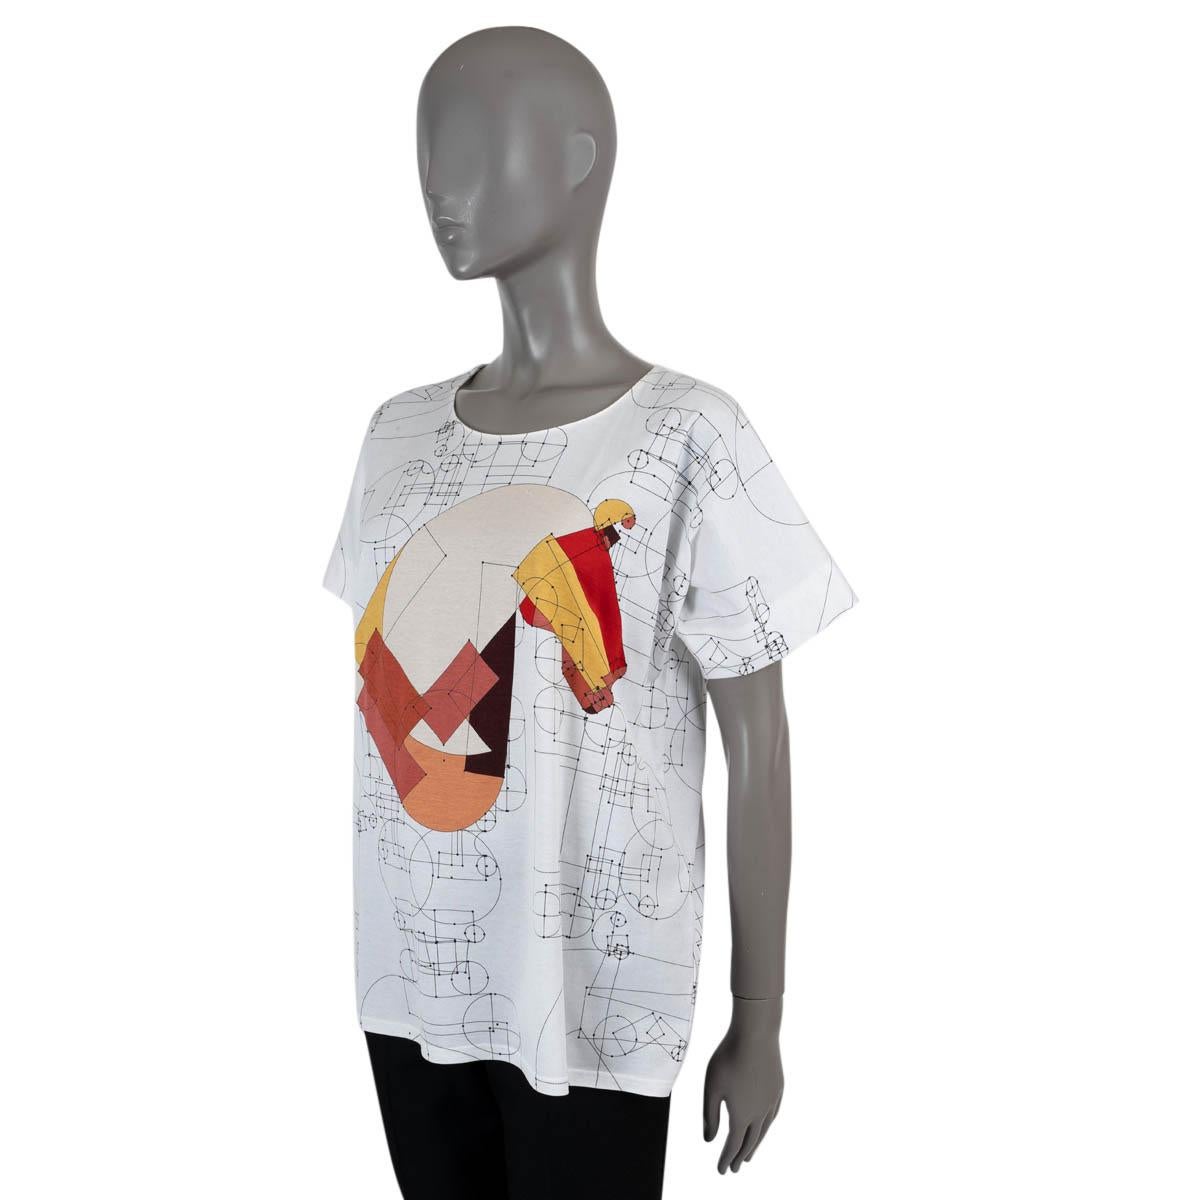 100% authentic Hermès t-shirt in white cotton jersey (100%) with Echec au Roi print in beige, brick, orange, yellow and black. Has a small spot on the left shoulder and on the front.

2013 Spring/Summer

Measurements
Tag Size	38
Size	S
Shoulder